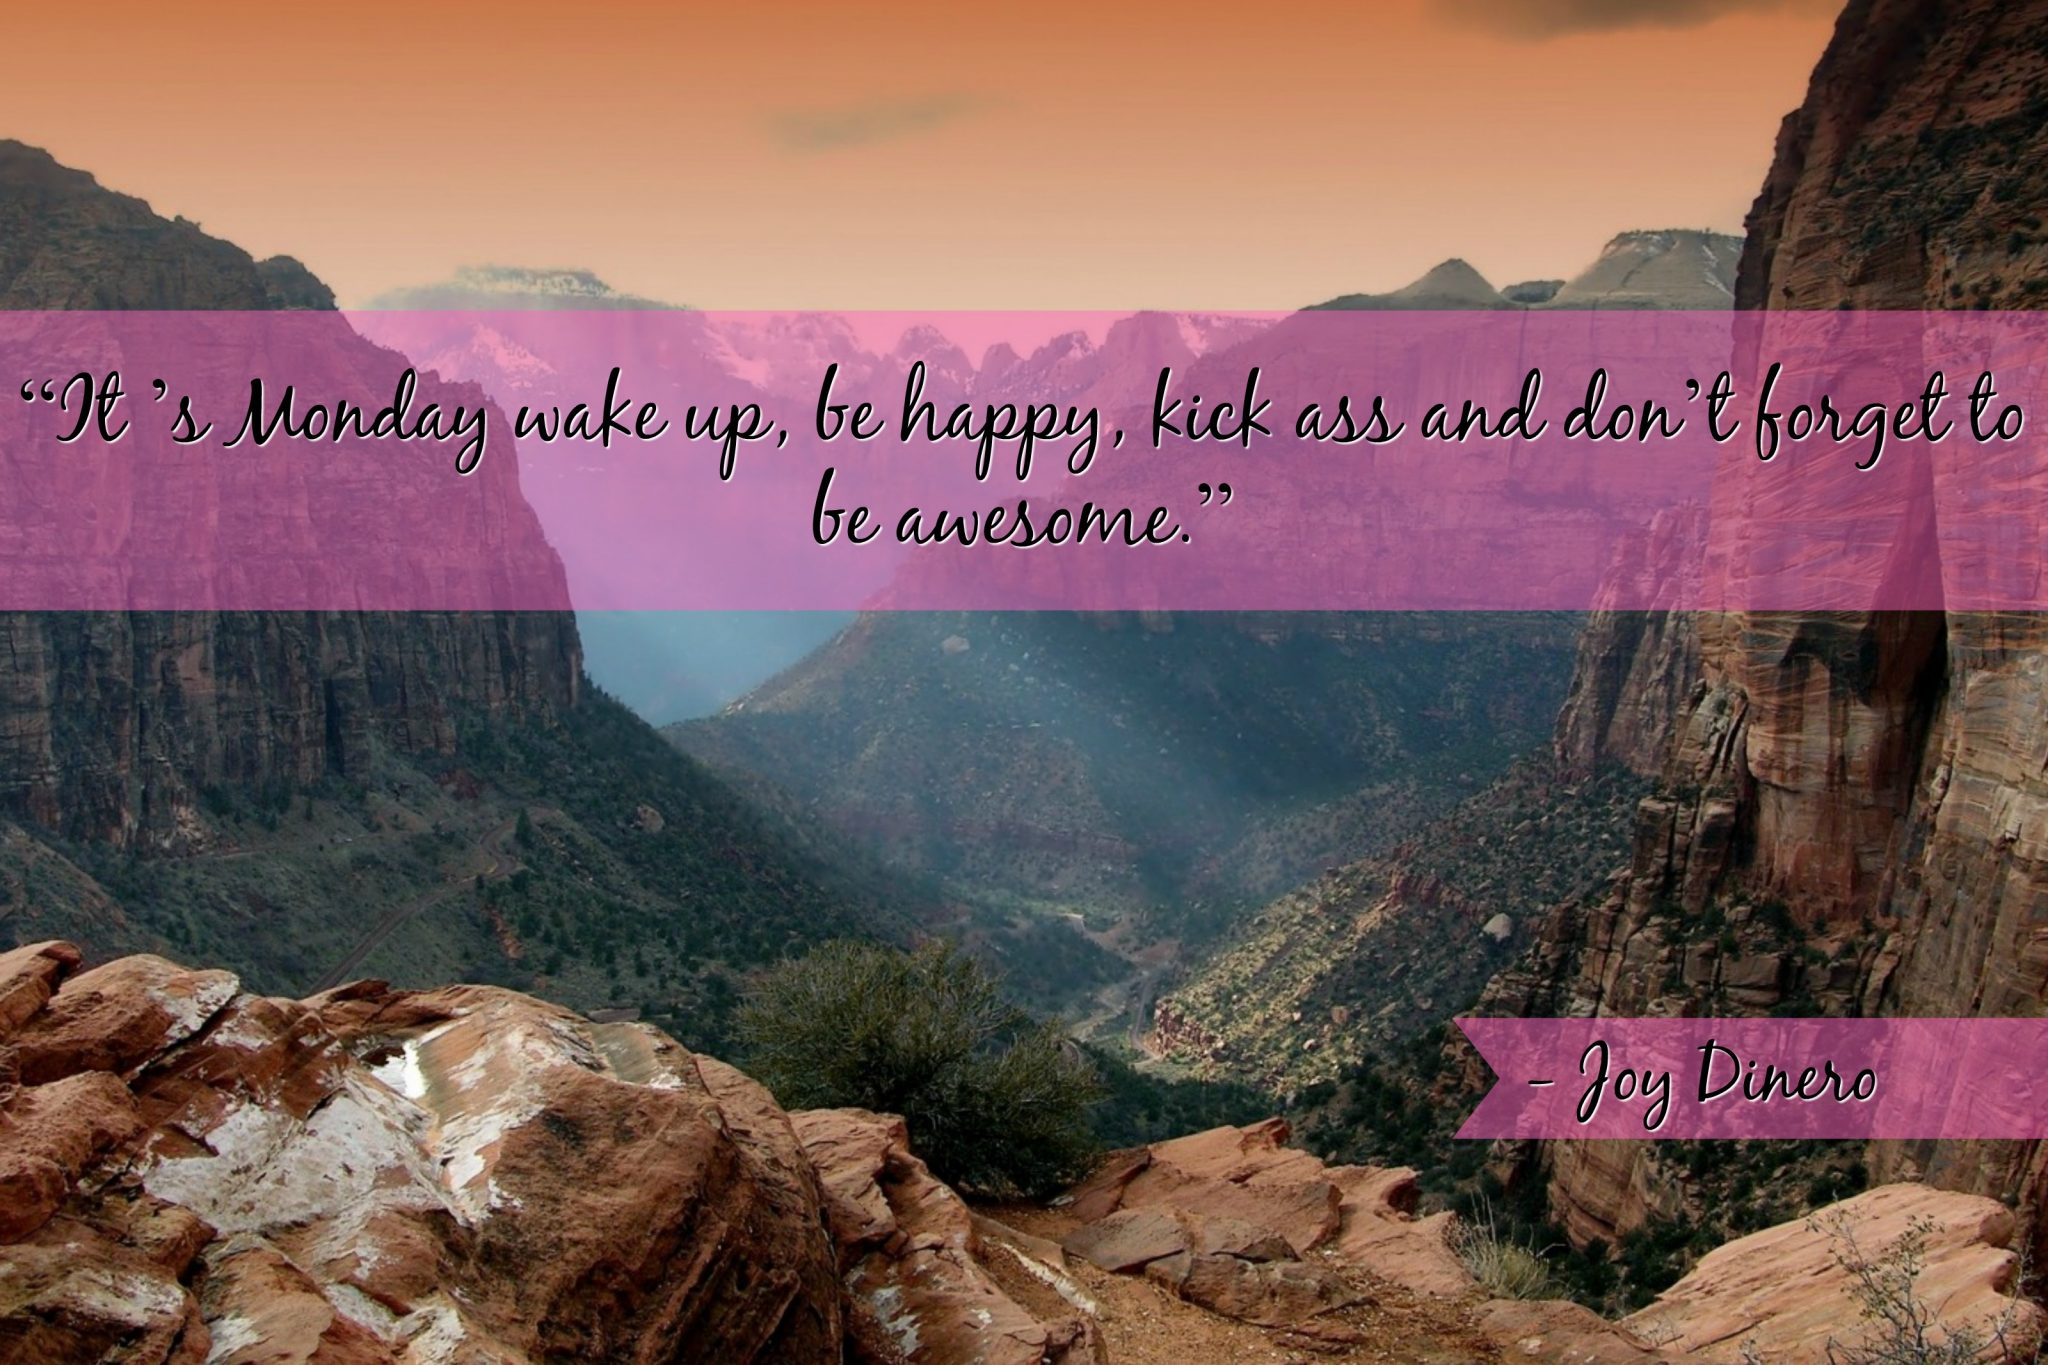 “It ’s Monday wake up, be happy, kick ass and don’t forget to be awesome.” - Joy Dinero